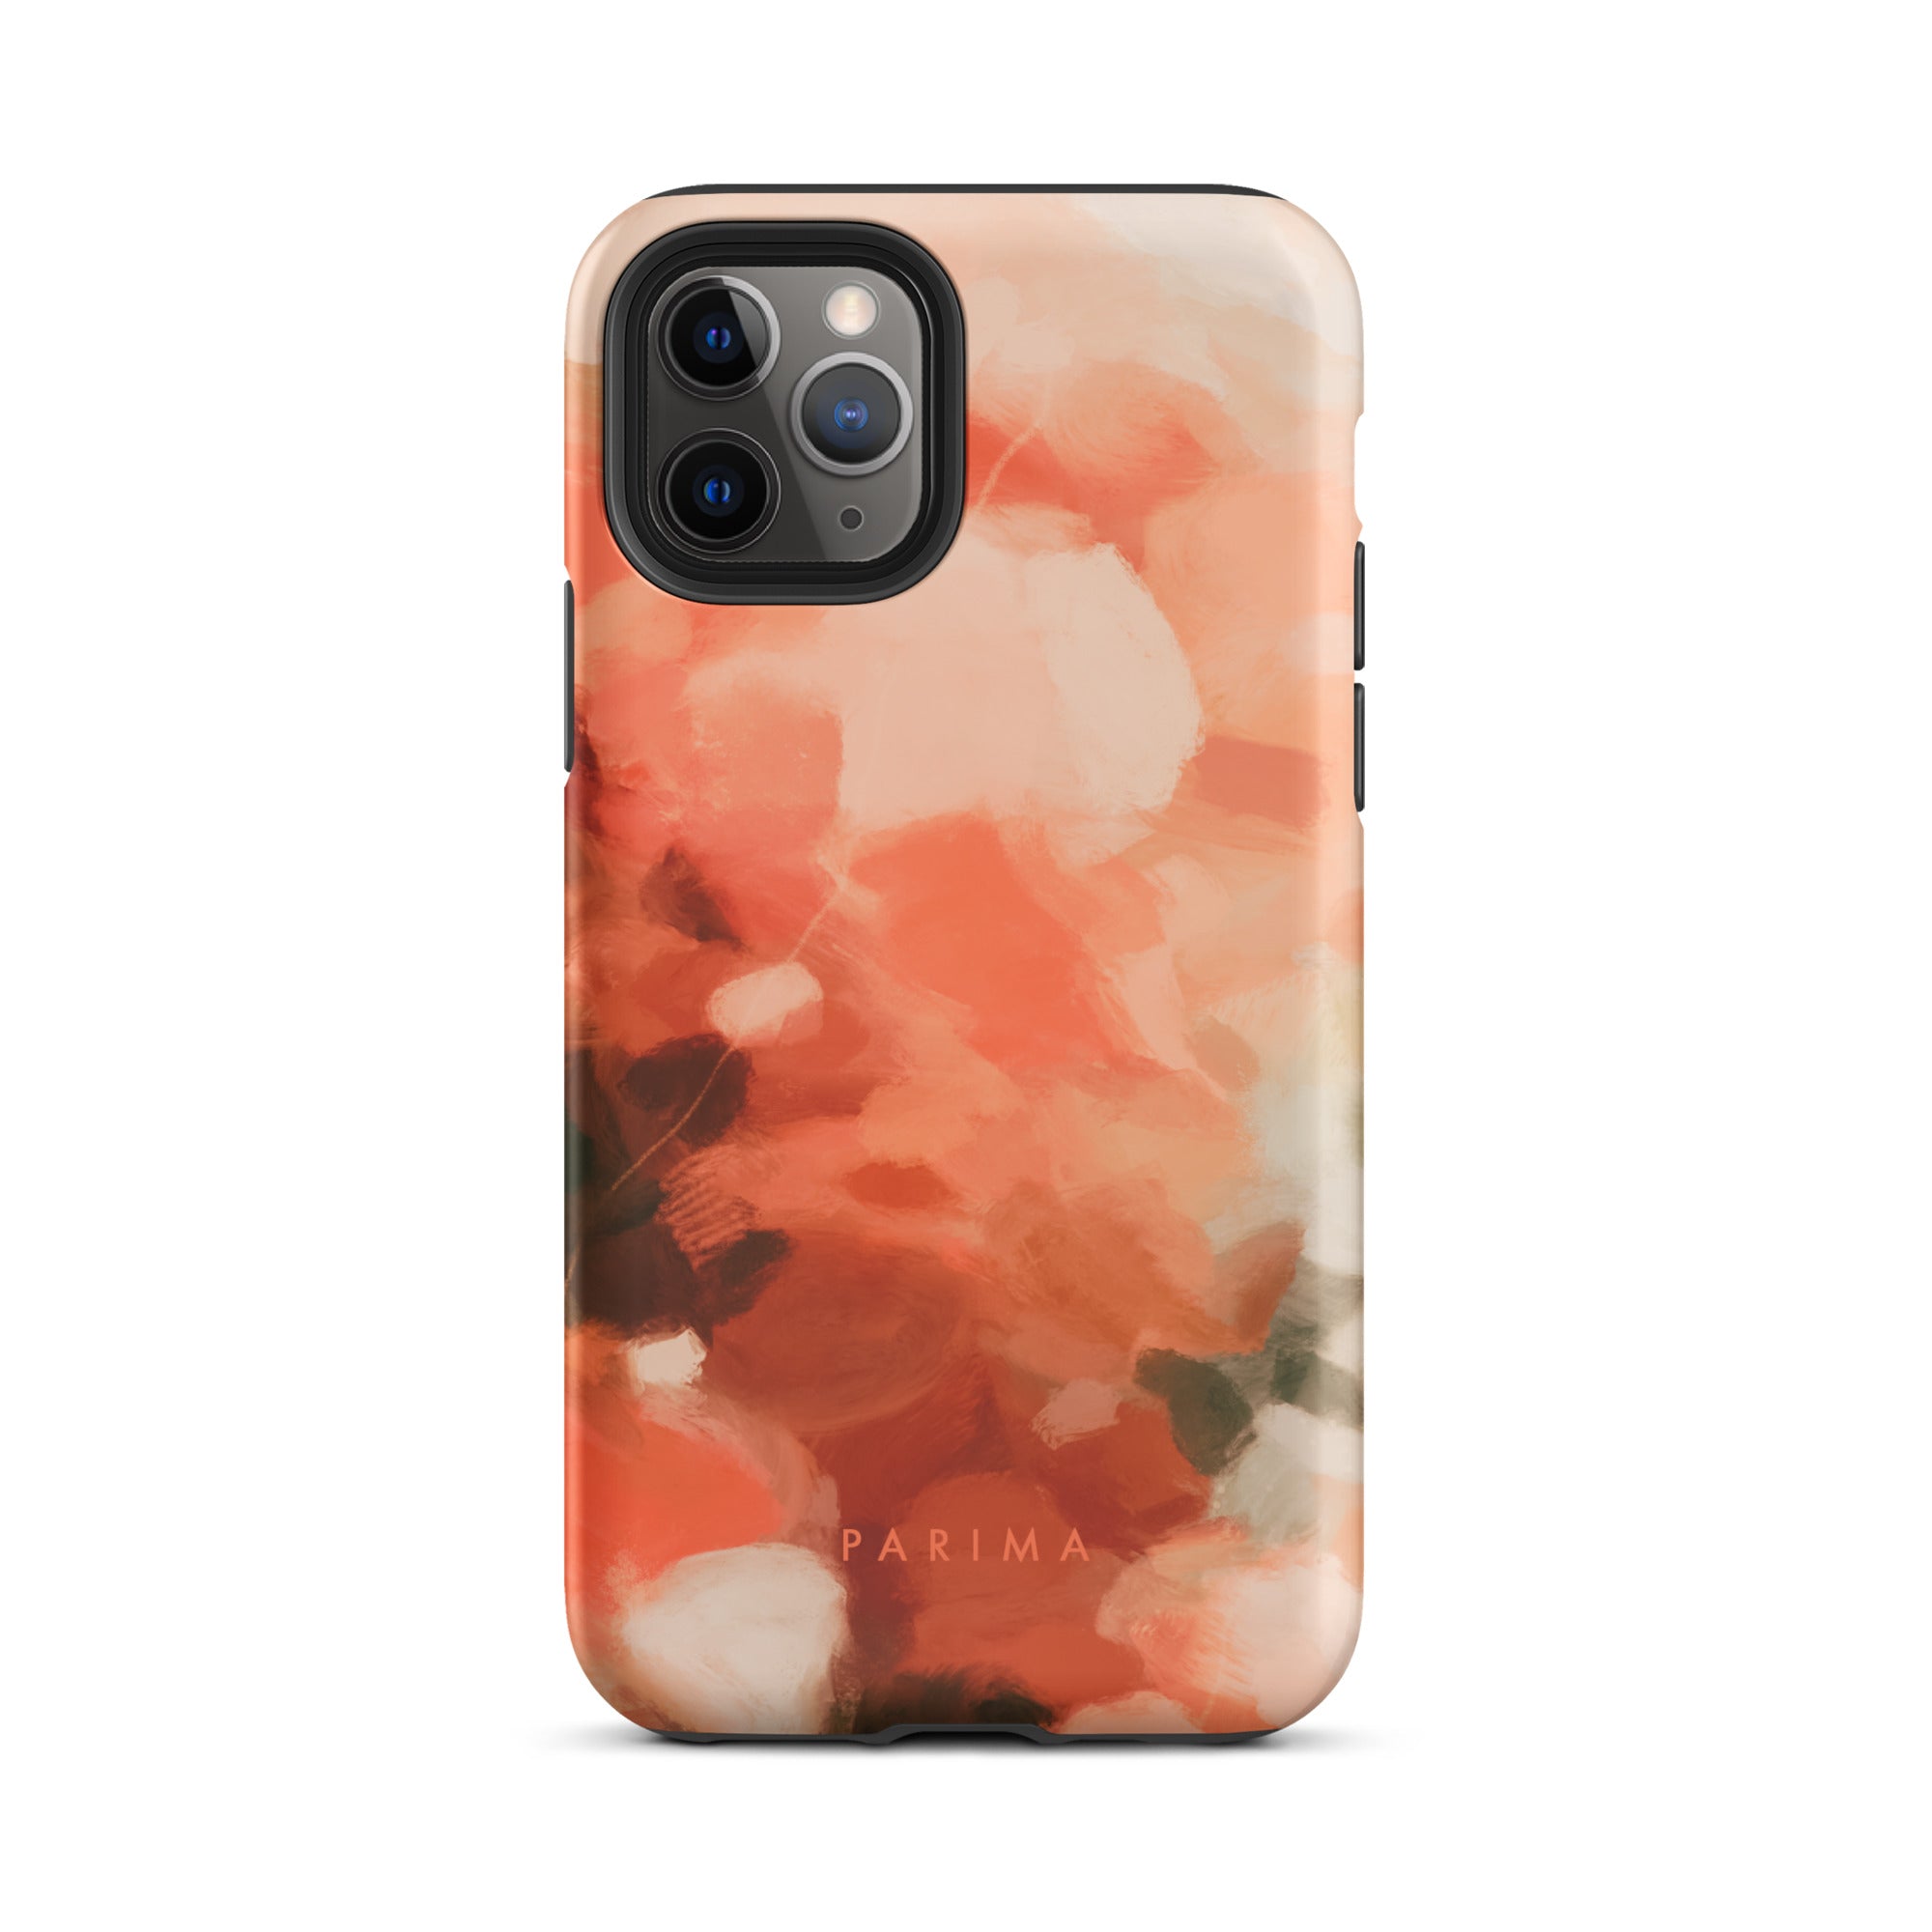 Sweet Nectar, orange and pink abstract art - iPhone 11 Pro tough case by Parima Studio